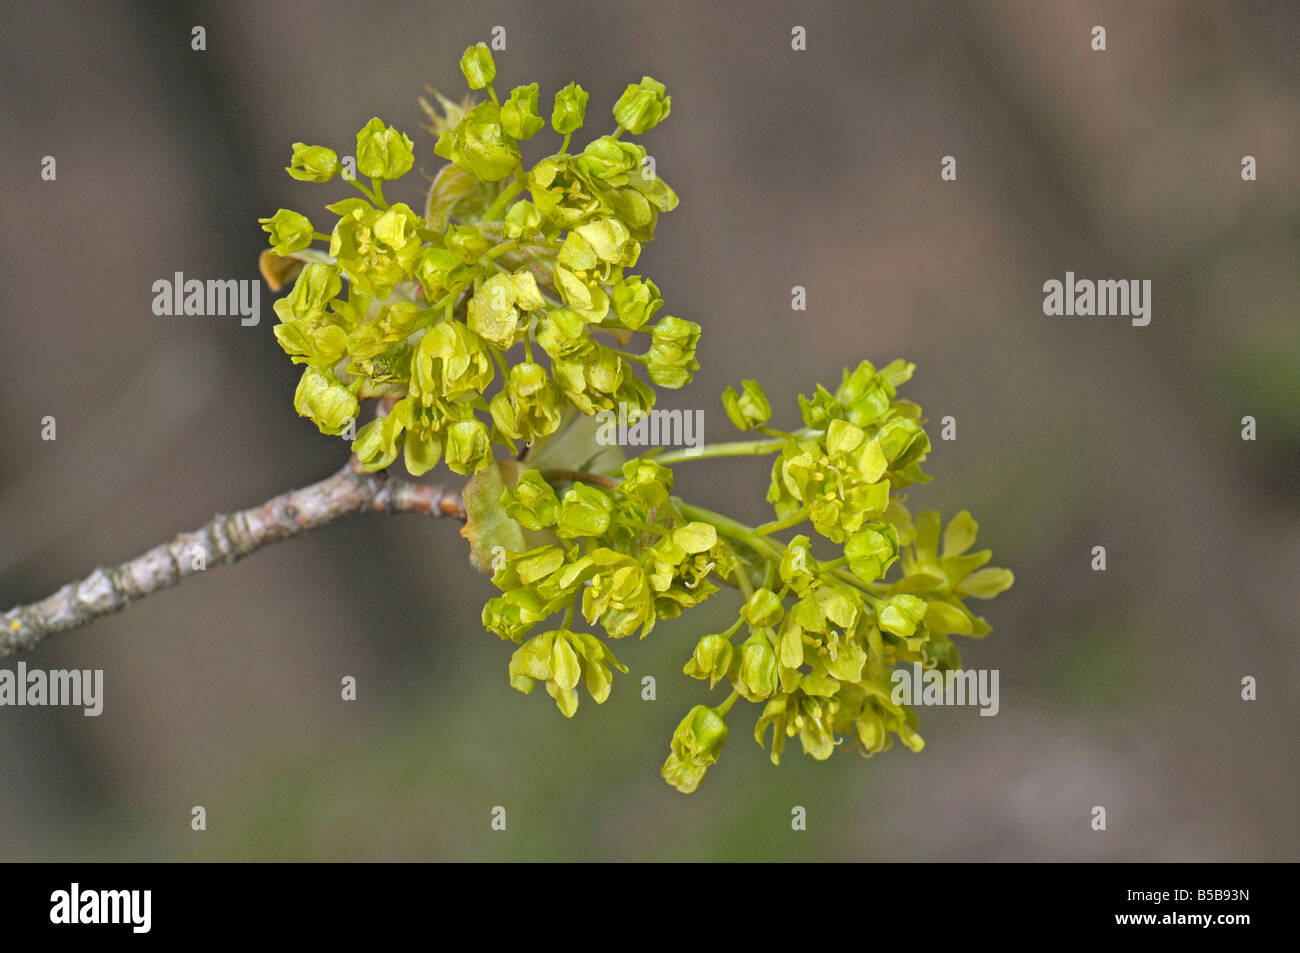 Norway Maple (Acer platanoides), twig with flowers Stock Photo